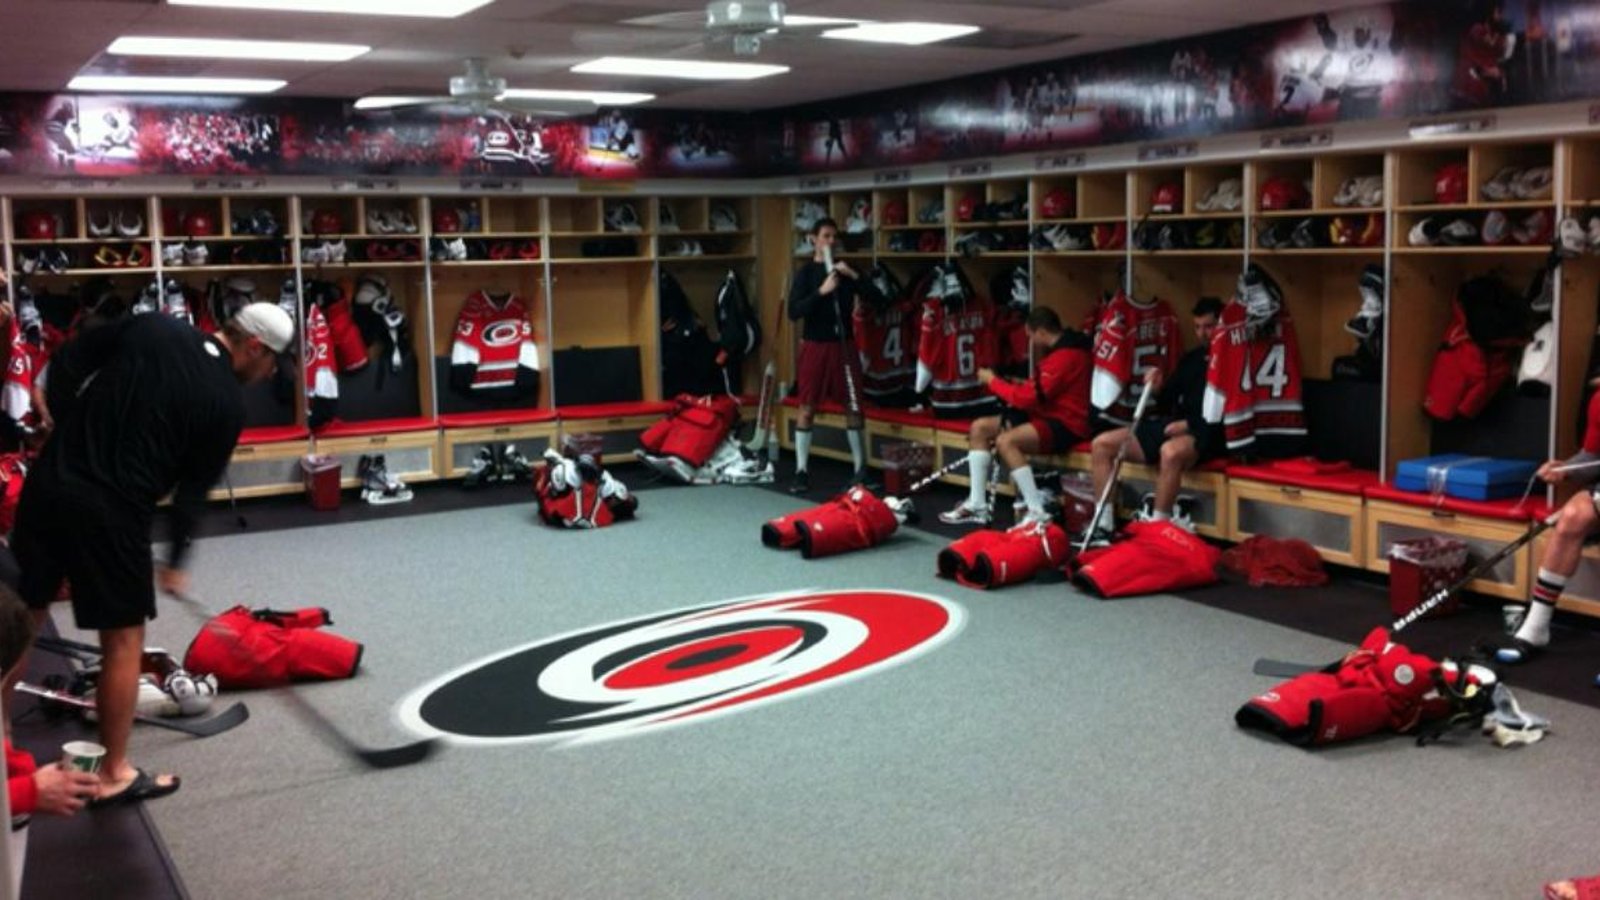 BREAKING | The NHL has advised all journalists that they can no longer enter the teams' locker rooms